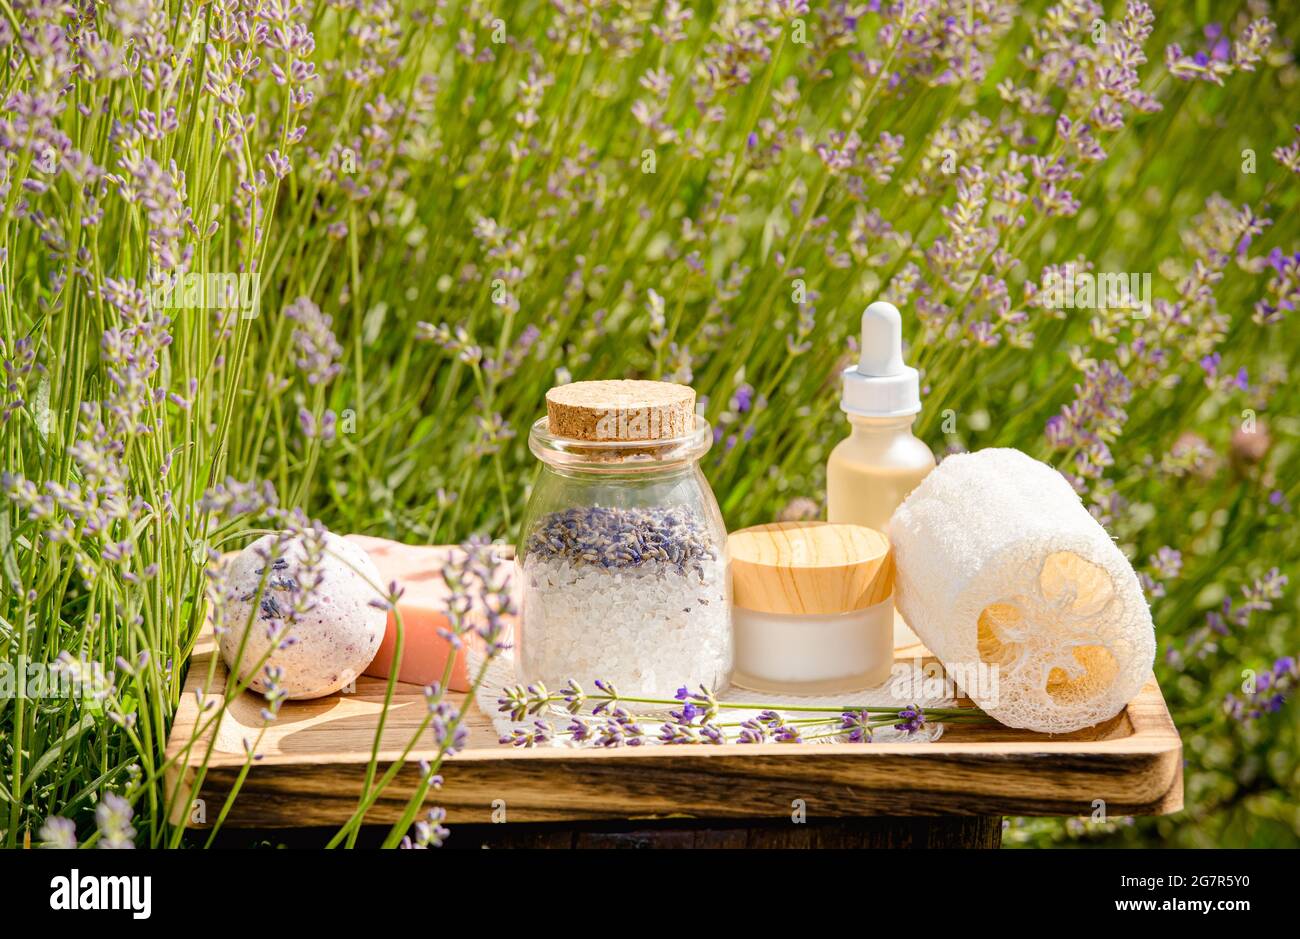 Various beauty spa products on wooden tray in blooming lavender field on sunny summer day. Bath salt, soap bar, day cream, moisturizer, bath bomb. Stock Photo